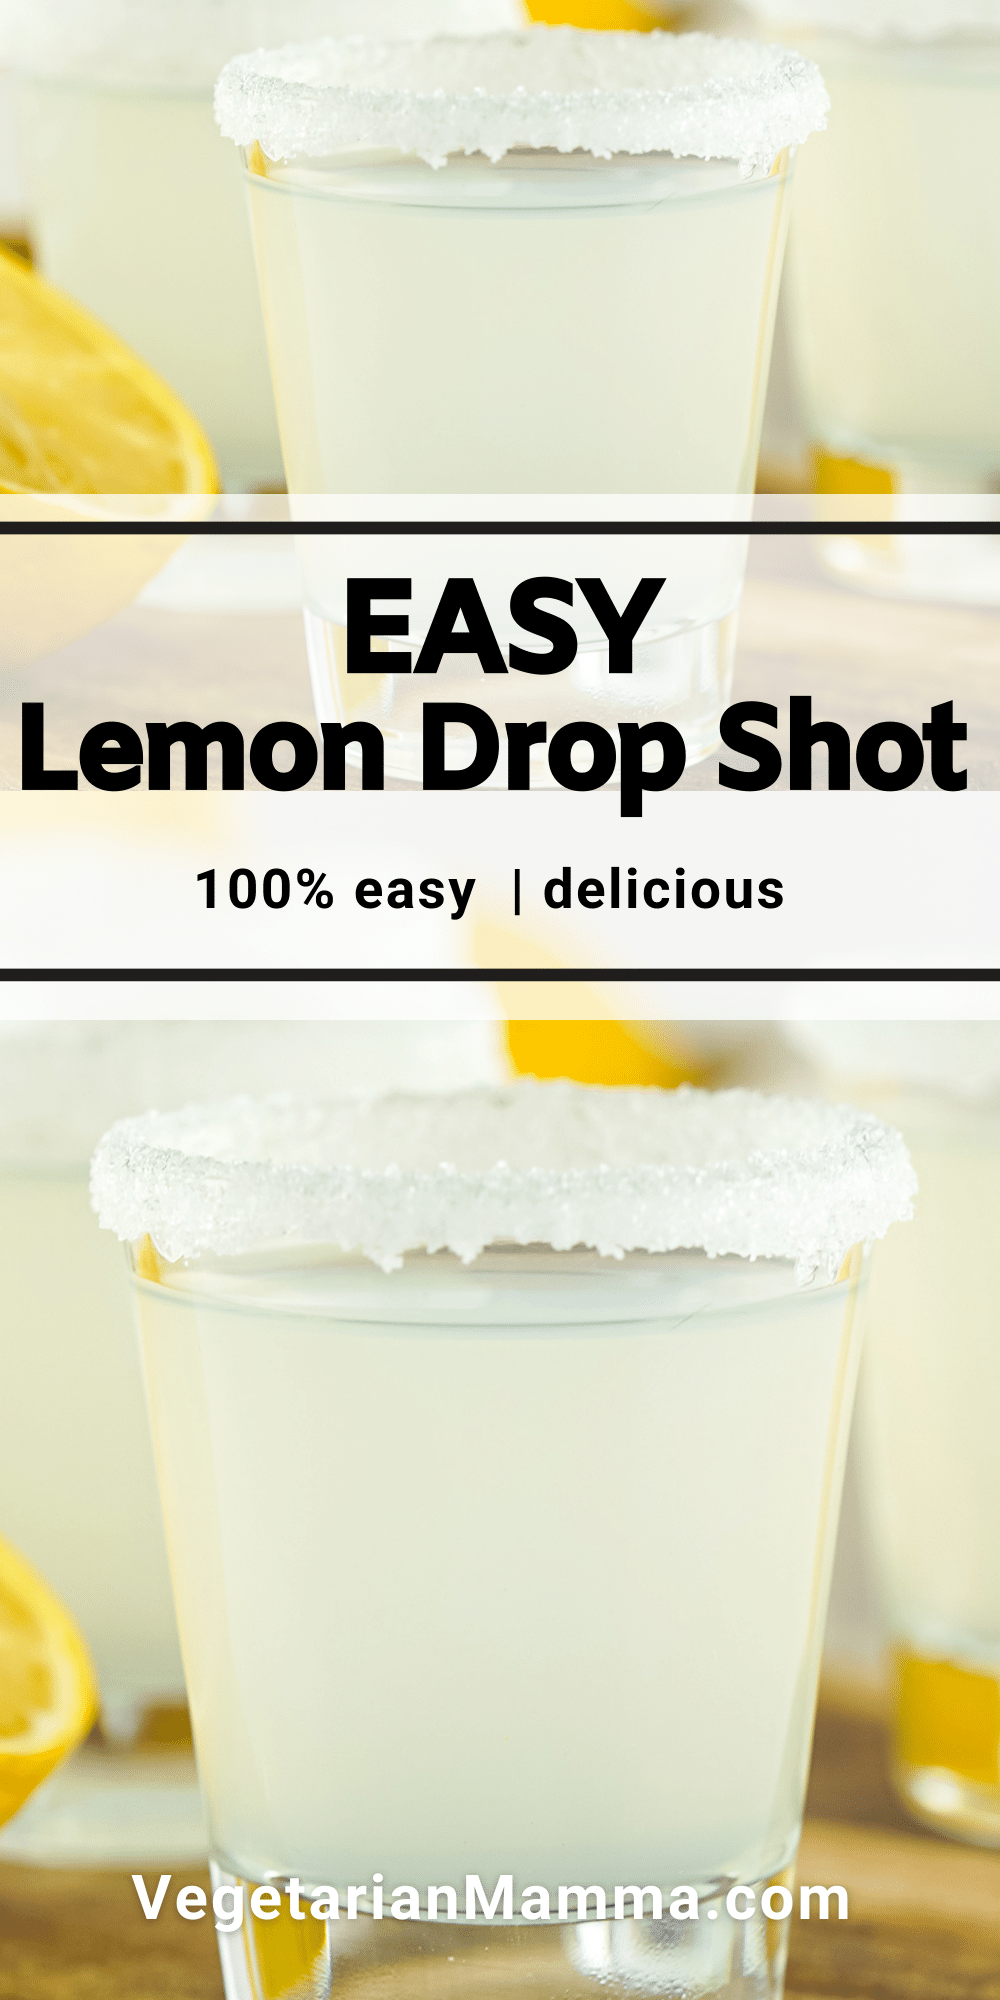 Delicious and simple Lemon Drop Shots are sweet, tart, and perfect for adding some fun to your next party! Made with just three ingredients, this easy cocktail recipe might just become your new signature drink.